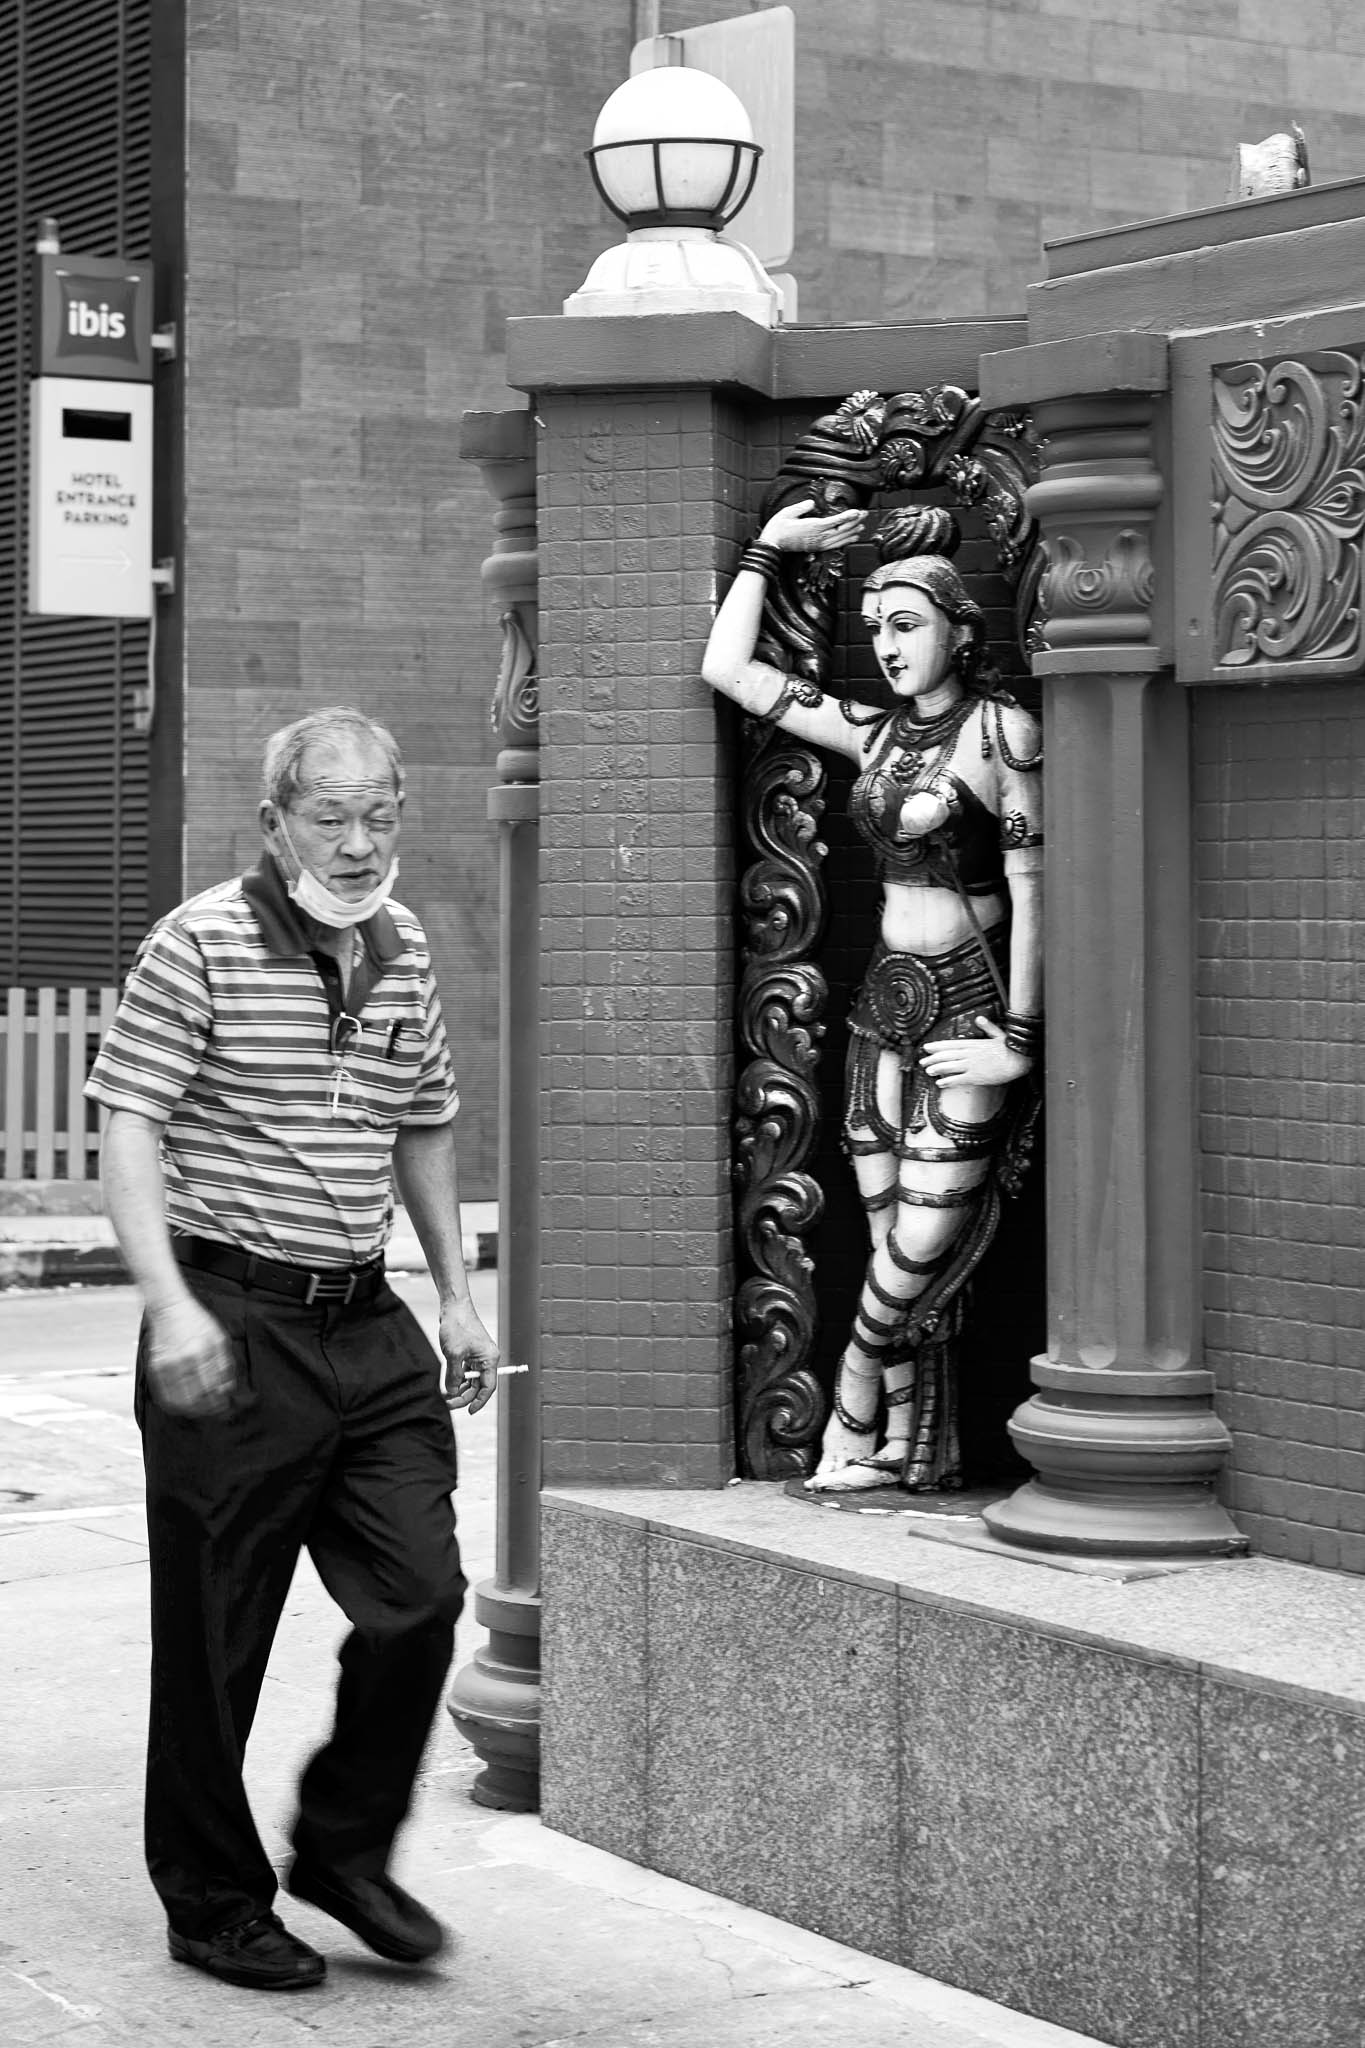 An old pedestrian walking past  the rear gate of the Sri Krishnan Temple, watched over by a guardian deity statue, Bugis, Singapore